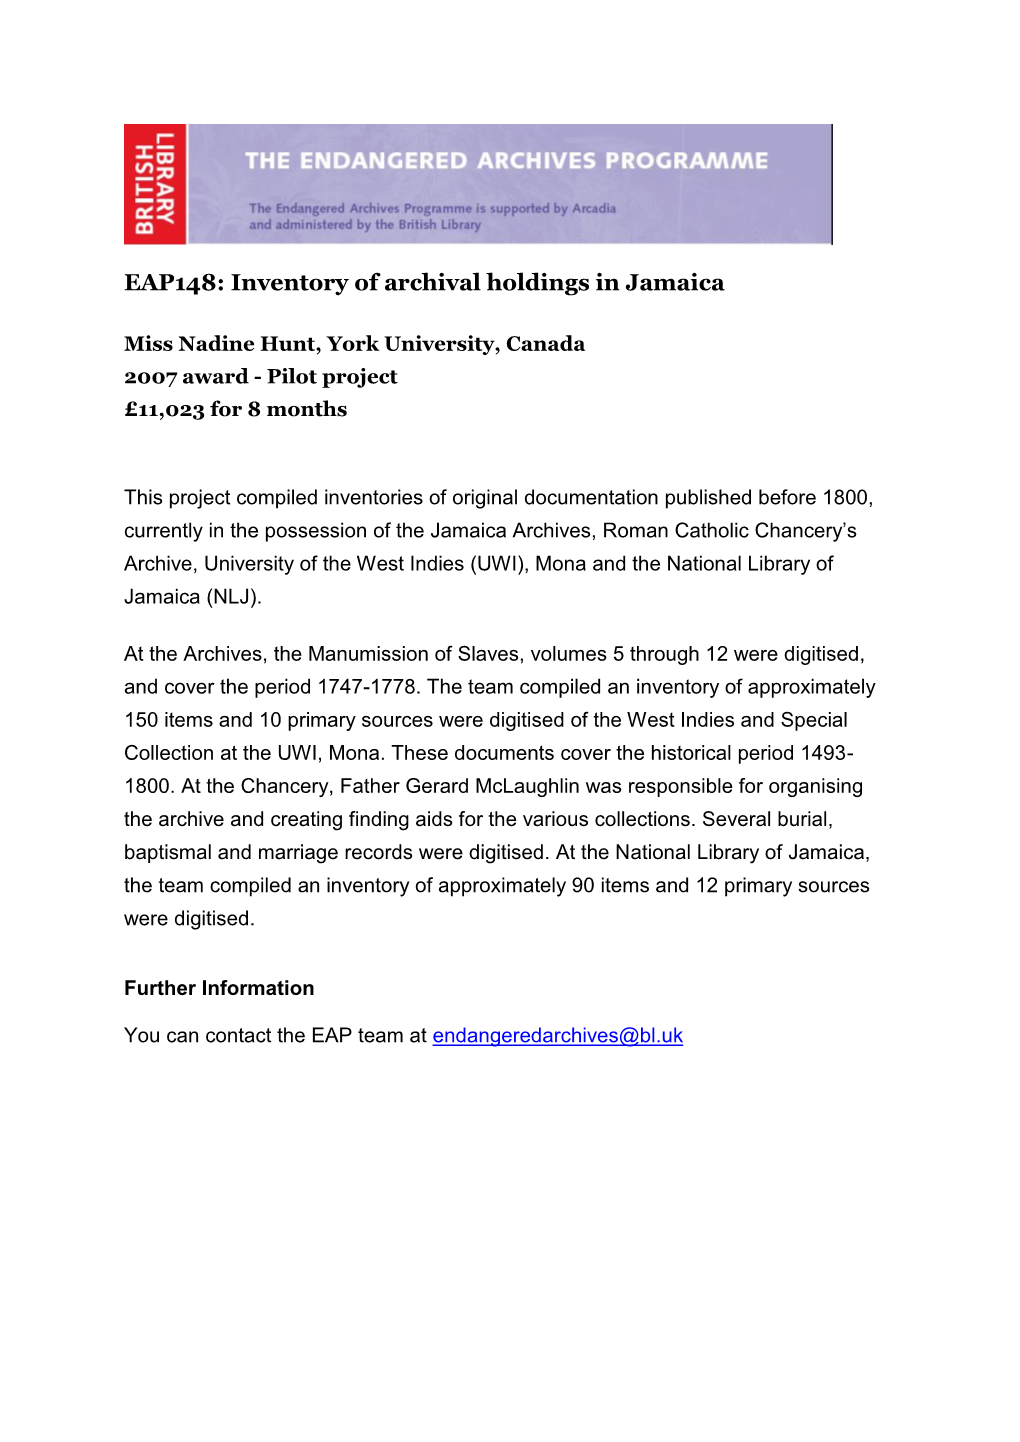 EAP148: Inventory of Archival Holdings in Jamaica